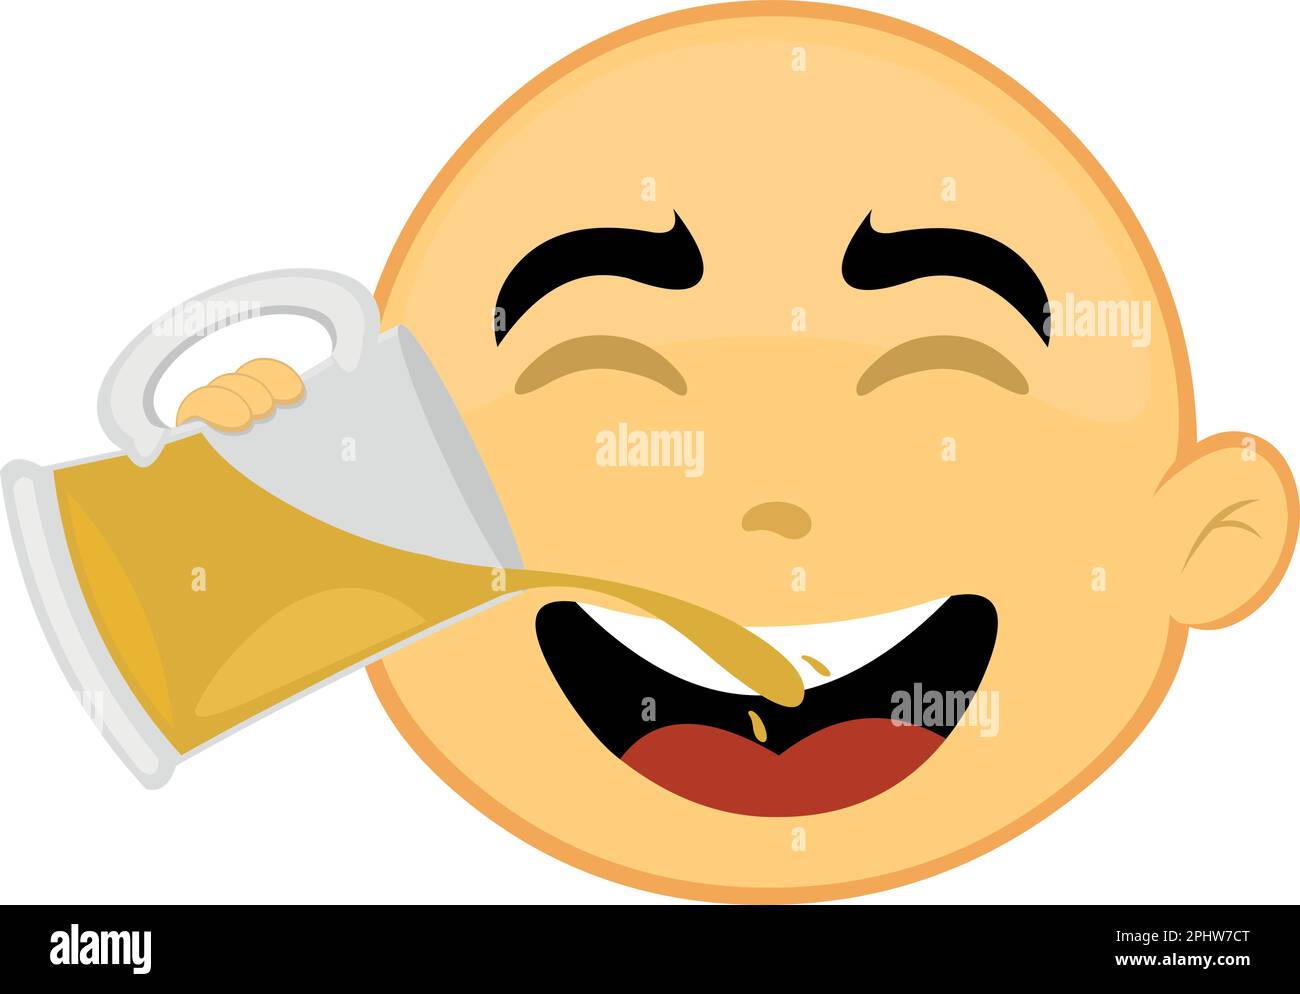 vector illustration emoticon character face cartoon yellow drinking a glass of beer Stock Vector